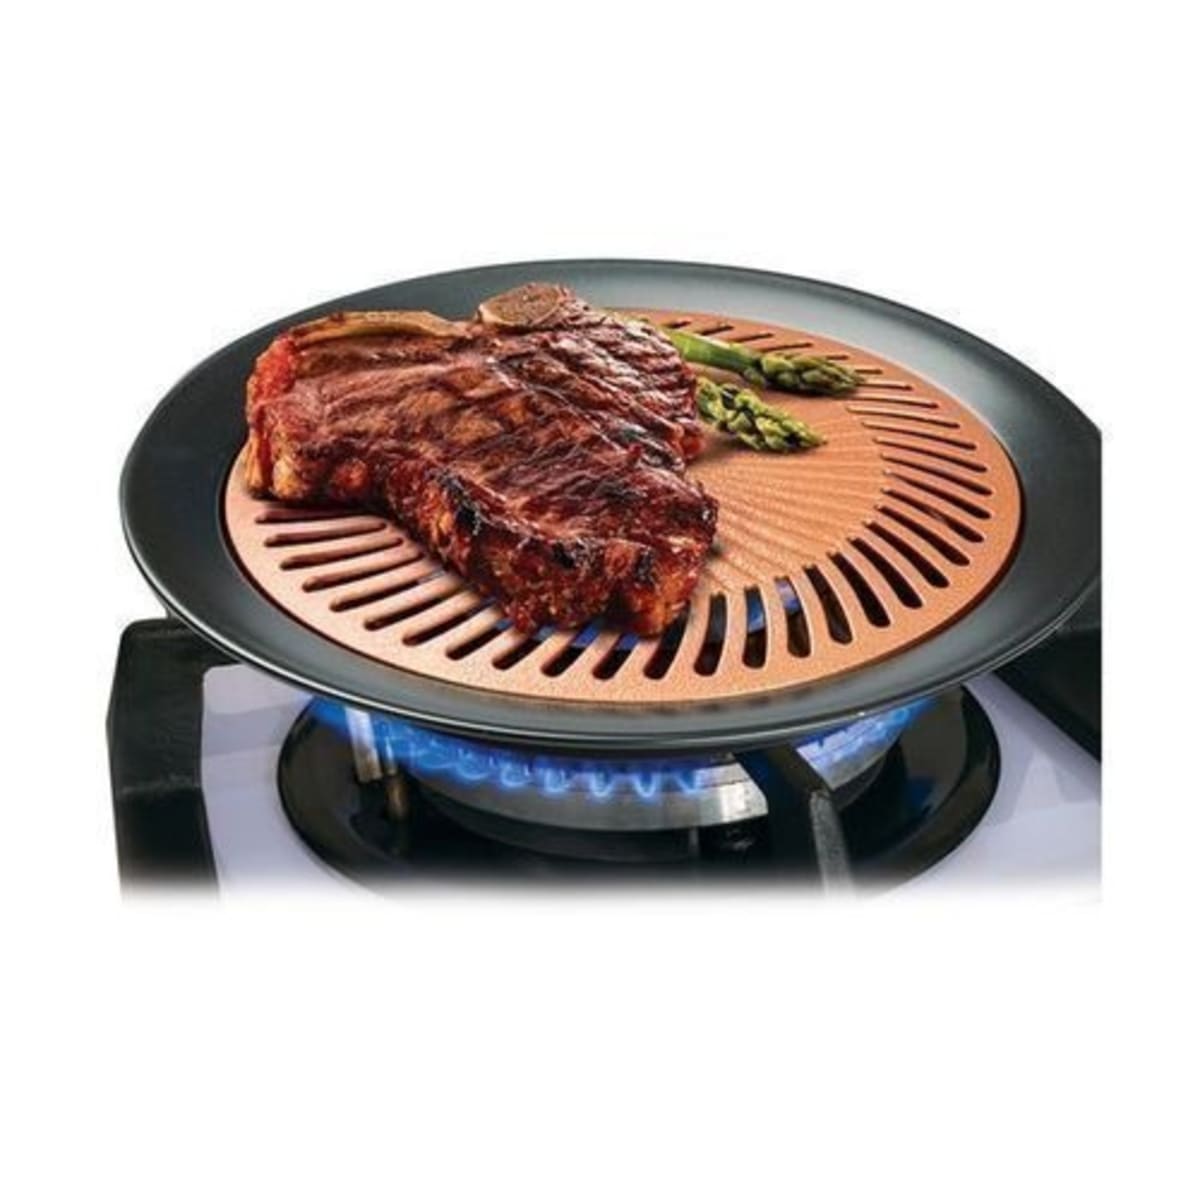 Smokeless Steaming Indoor STOVETOP BBQ GRILL Barbeque Kitchen Barbecue Pan  Griddle 